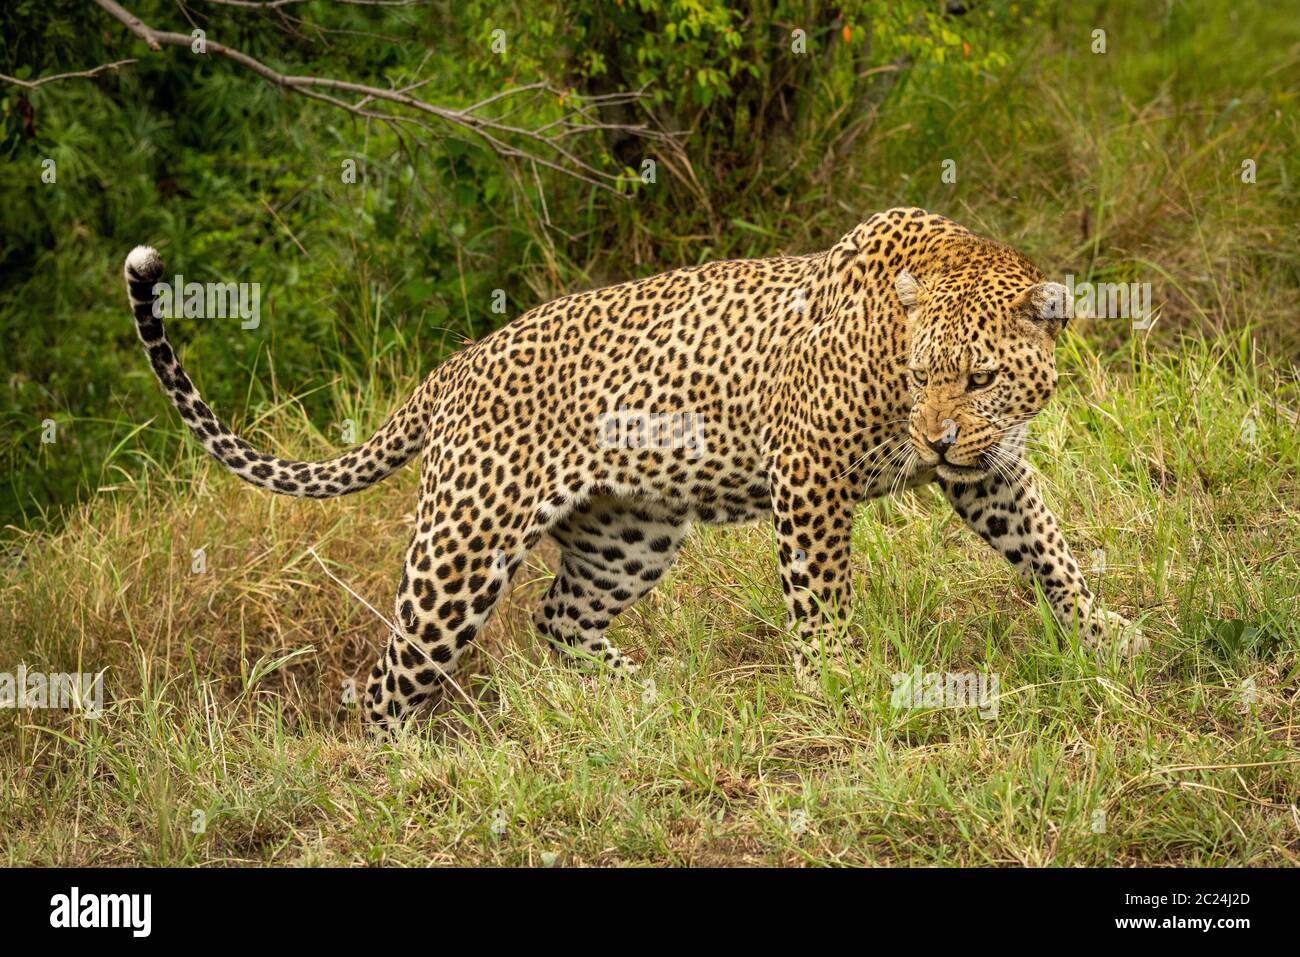 Leopard stands growling with head held low Stock Photo